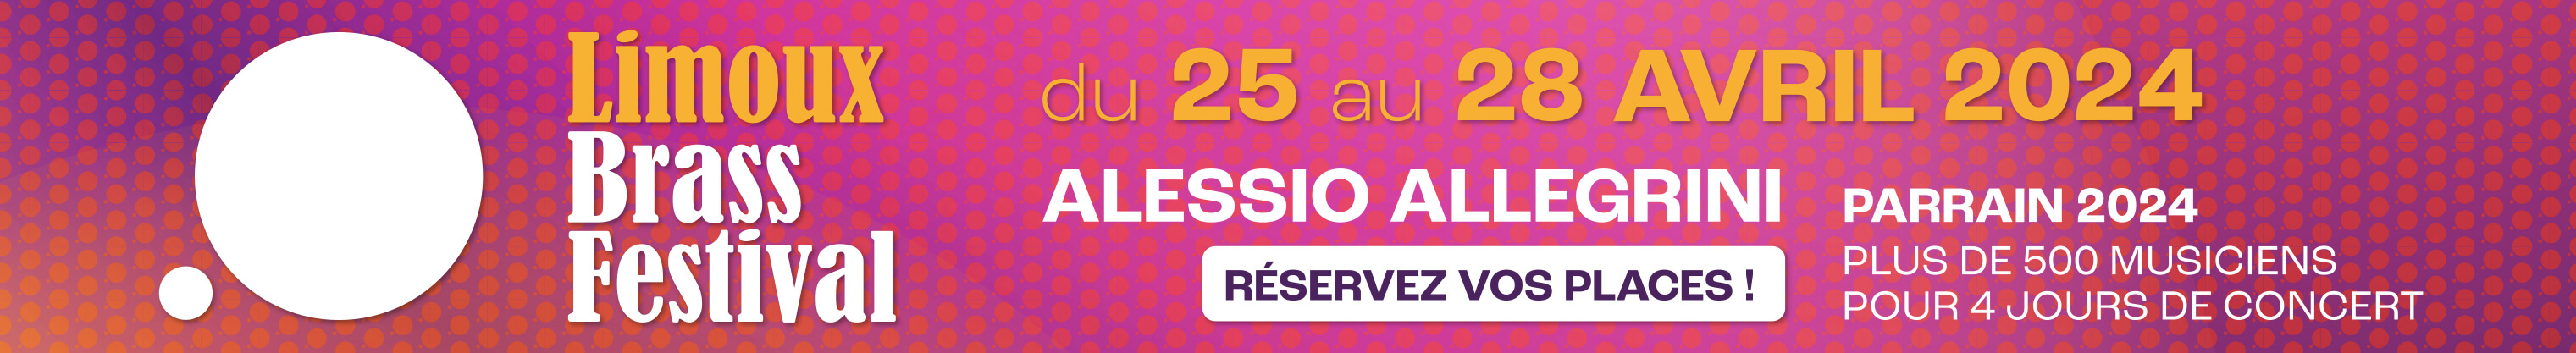 Limoux Brass Festoval - Edition 2024